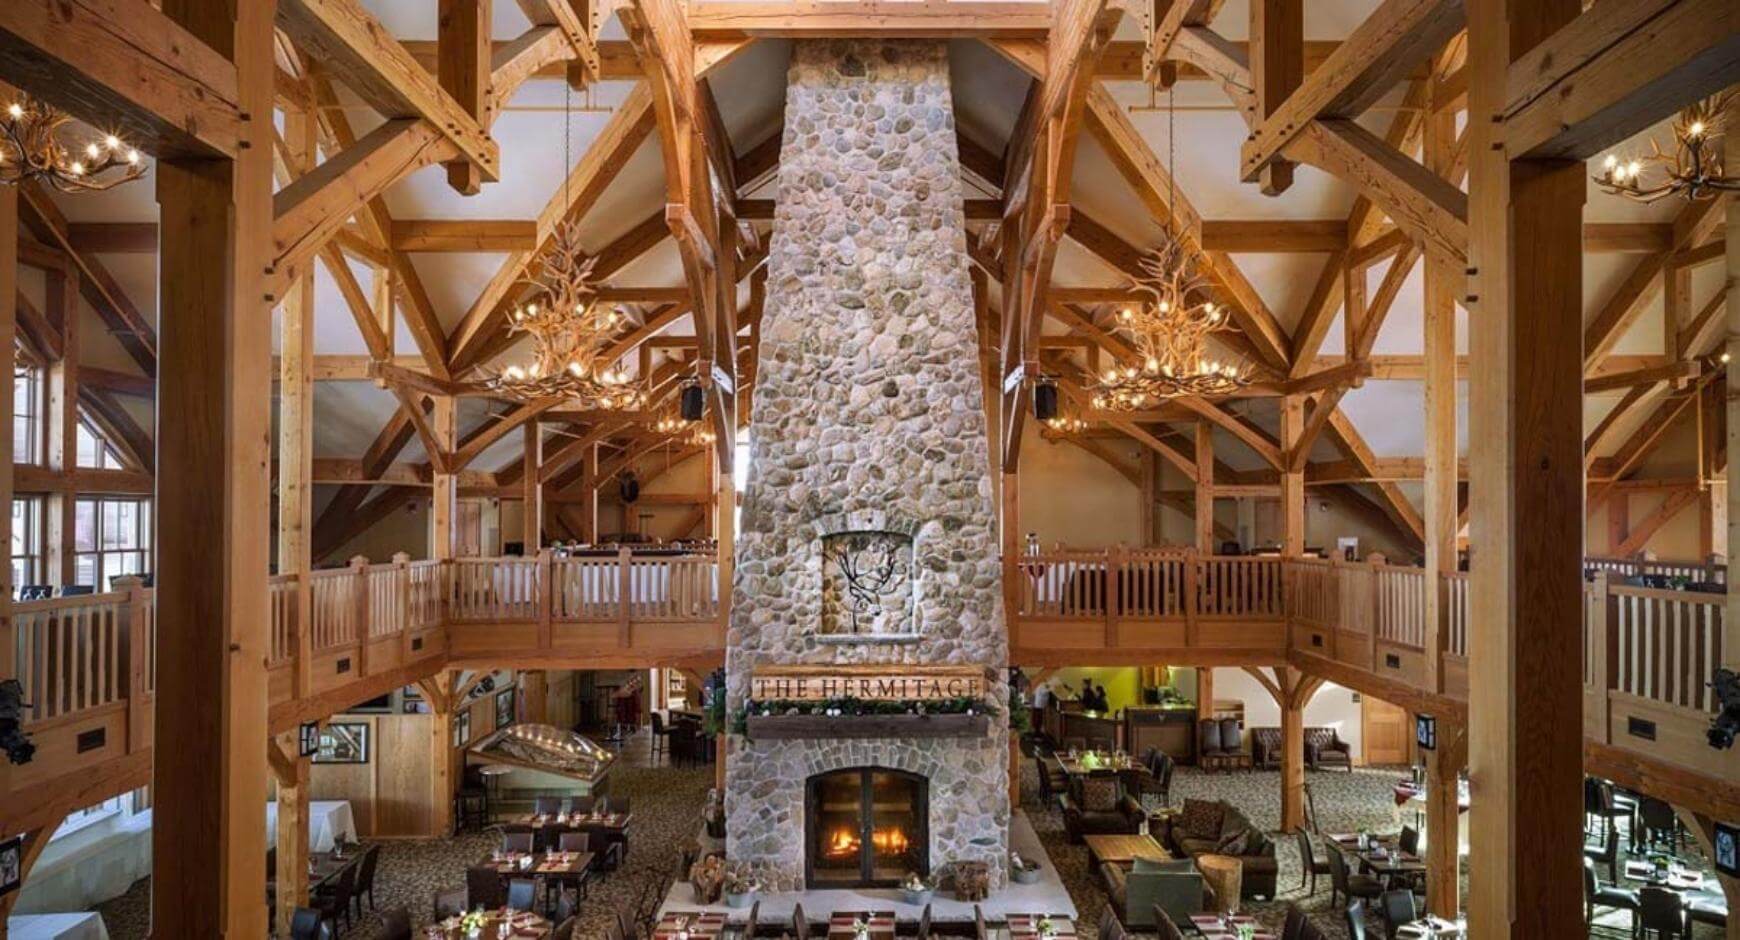 large fireplace centerpiece in hotel lobby